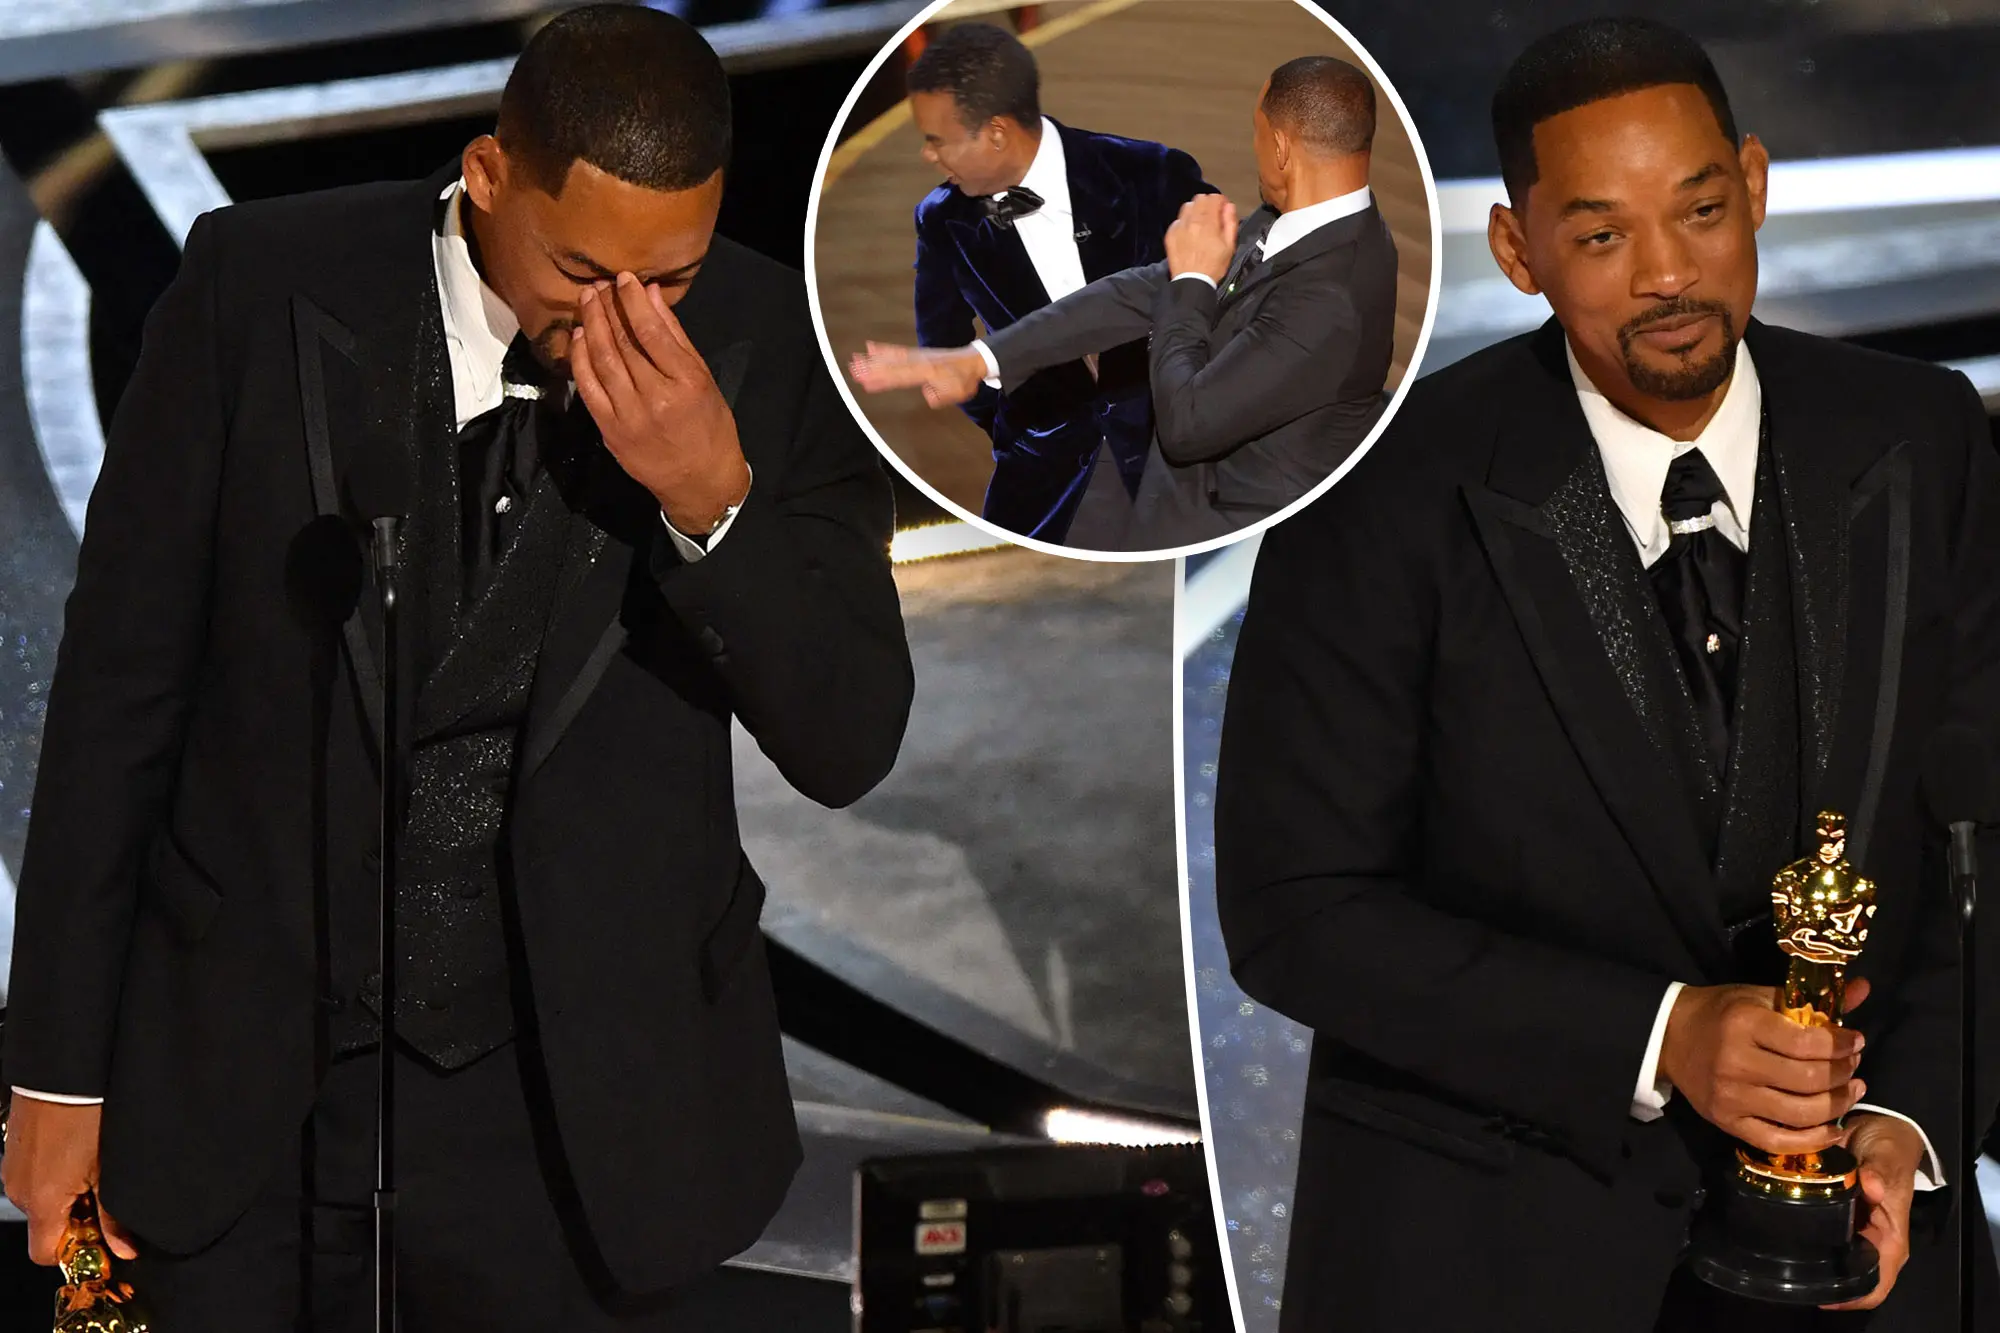 Will Smith Slap Chris Rock For What Reason? At Oscars 2022 Moment